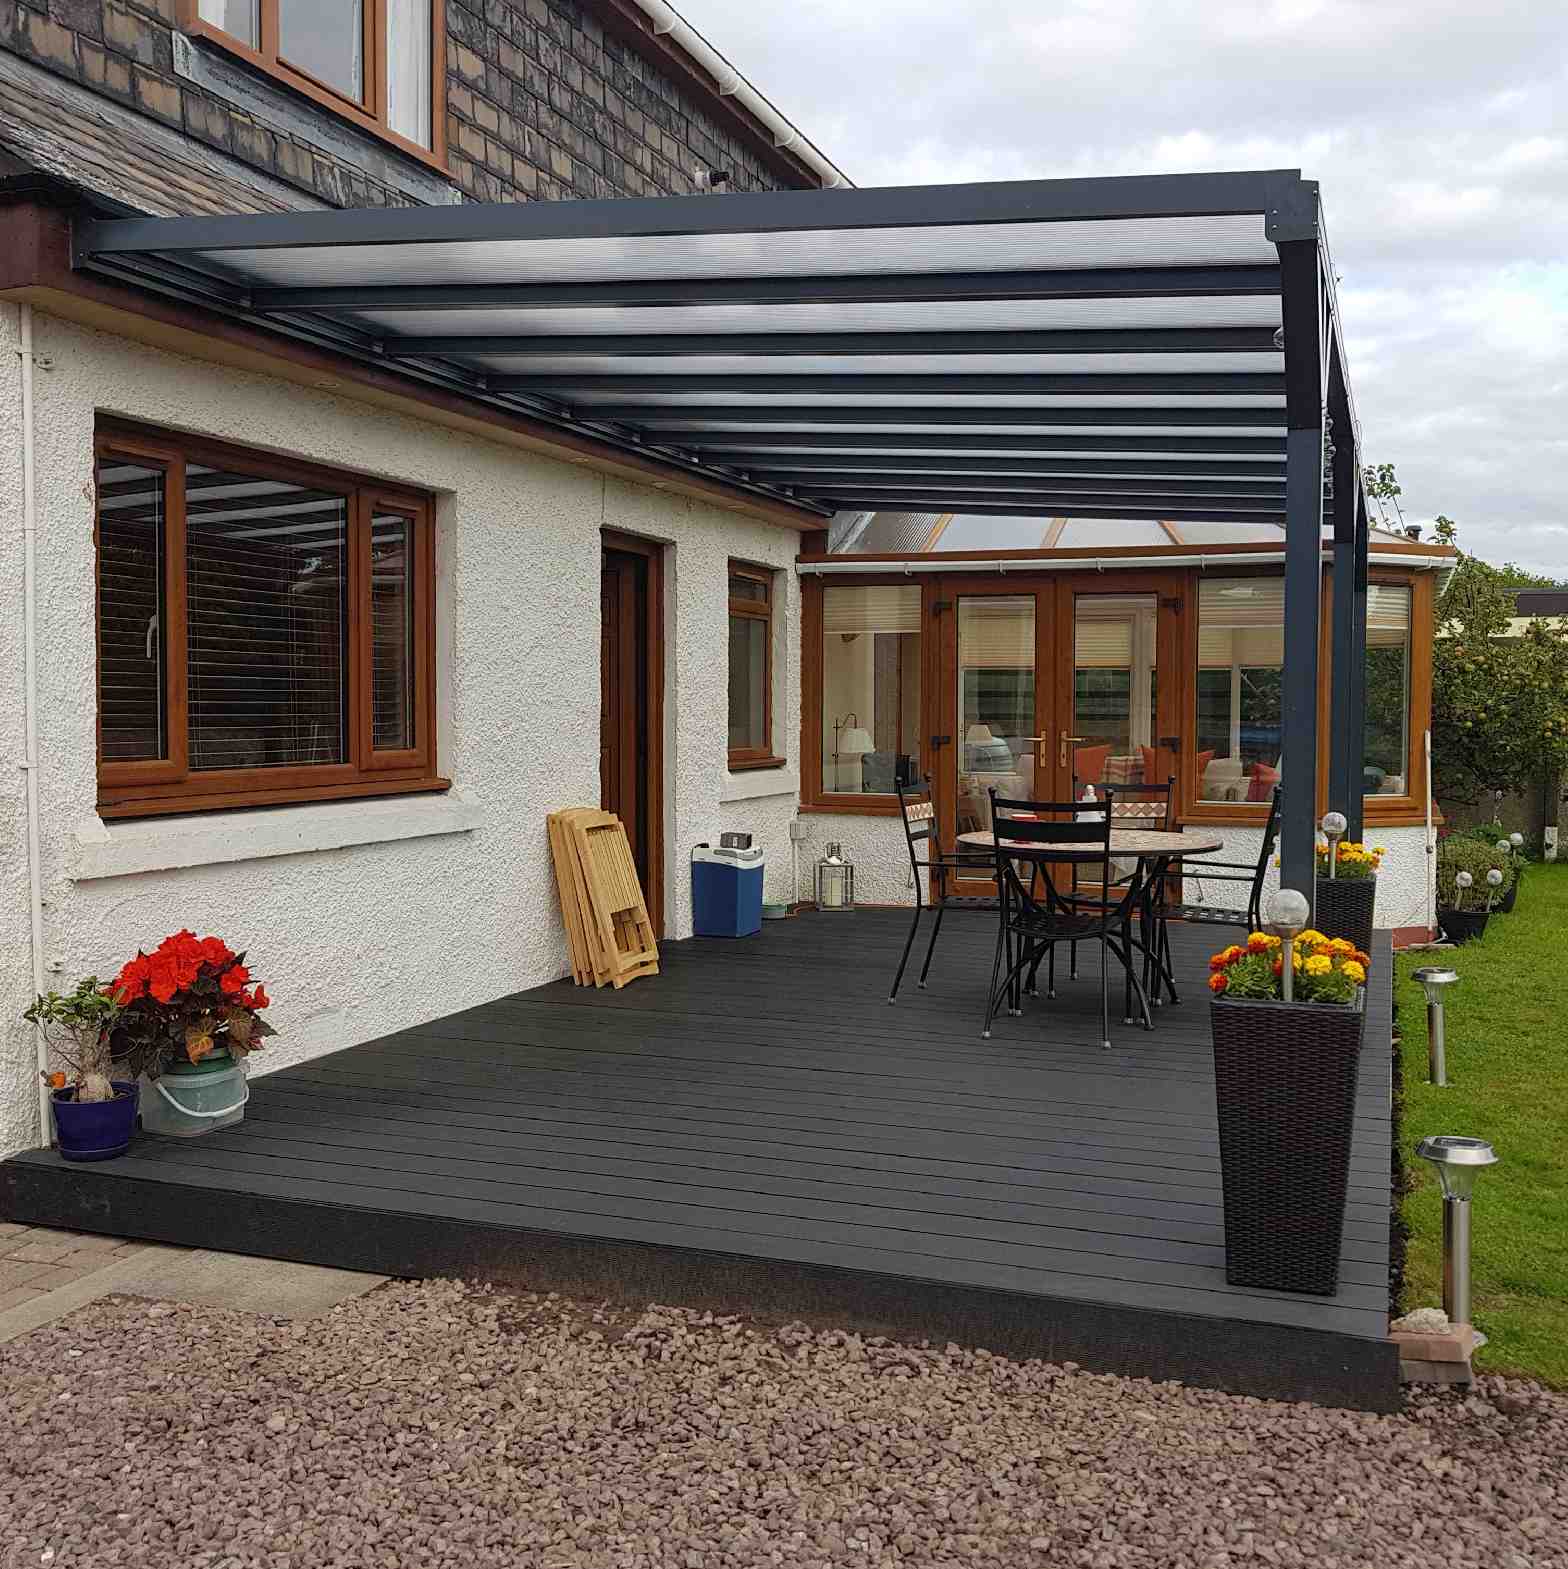 Buy Omega Verandah, Anthracite Grey, 16mm Polycarbonate Glazing - 5.2m (W) x 2.5m (P), (3) Supporting Posts online today